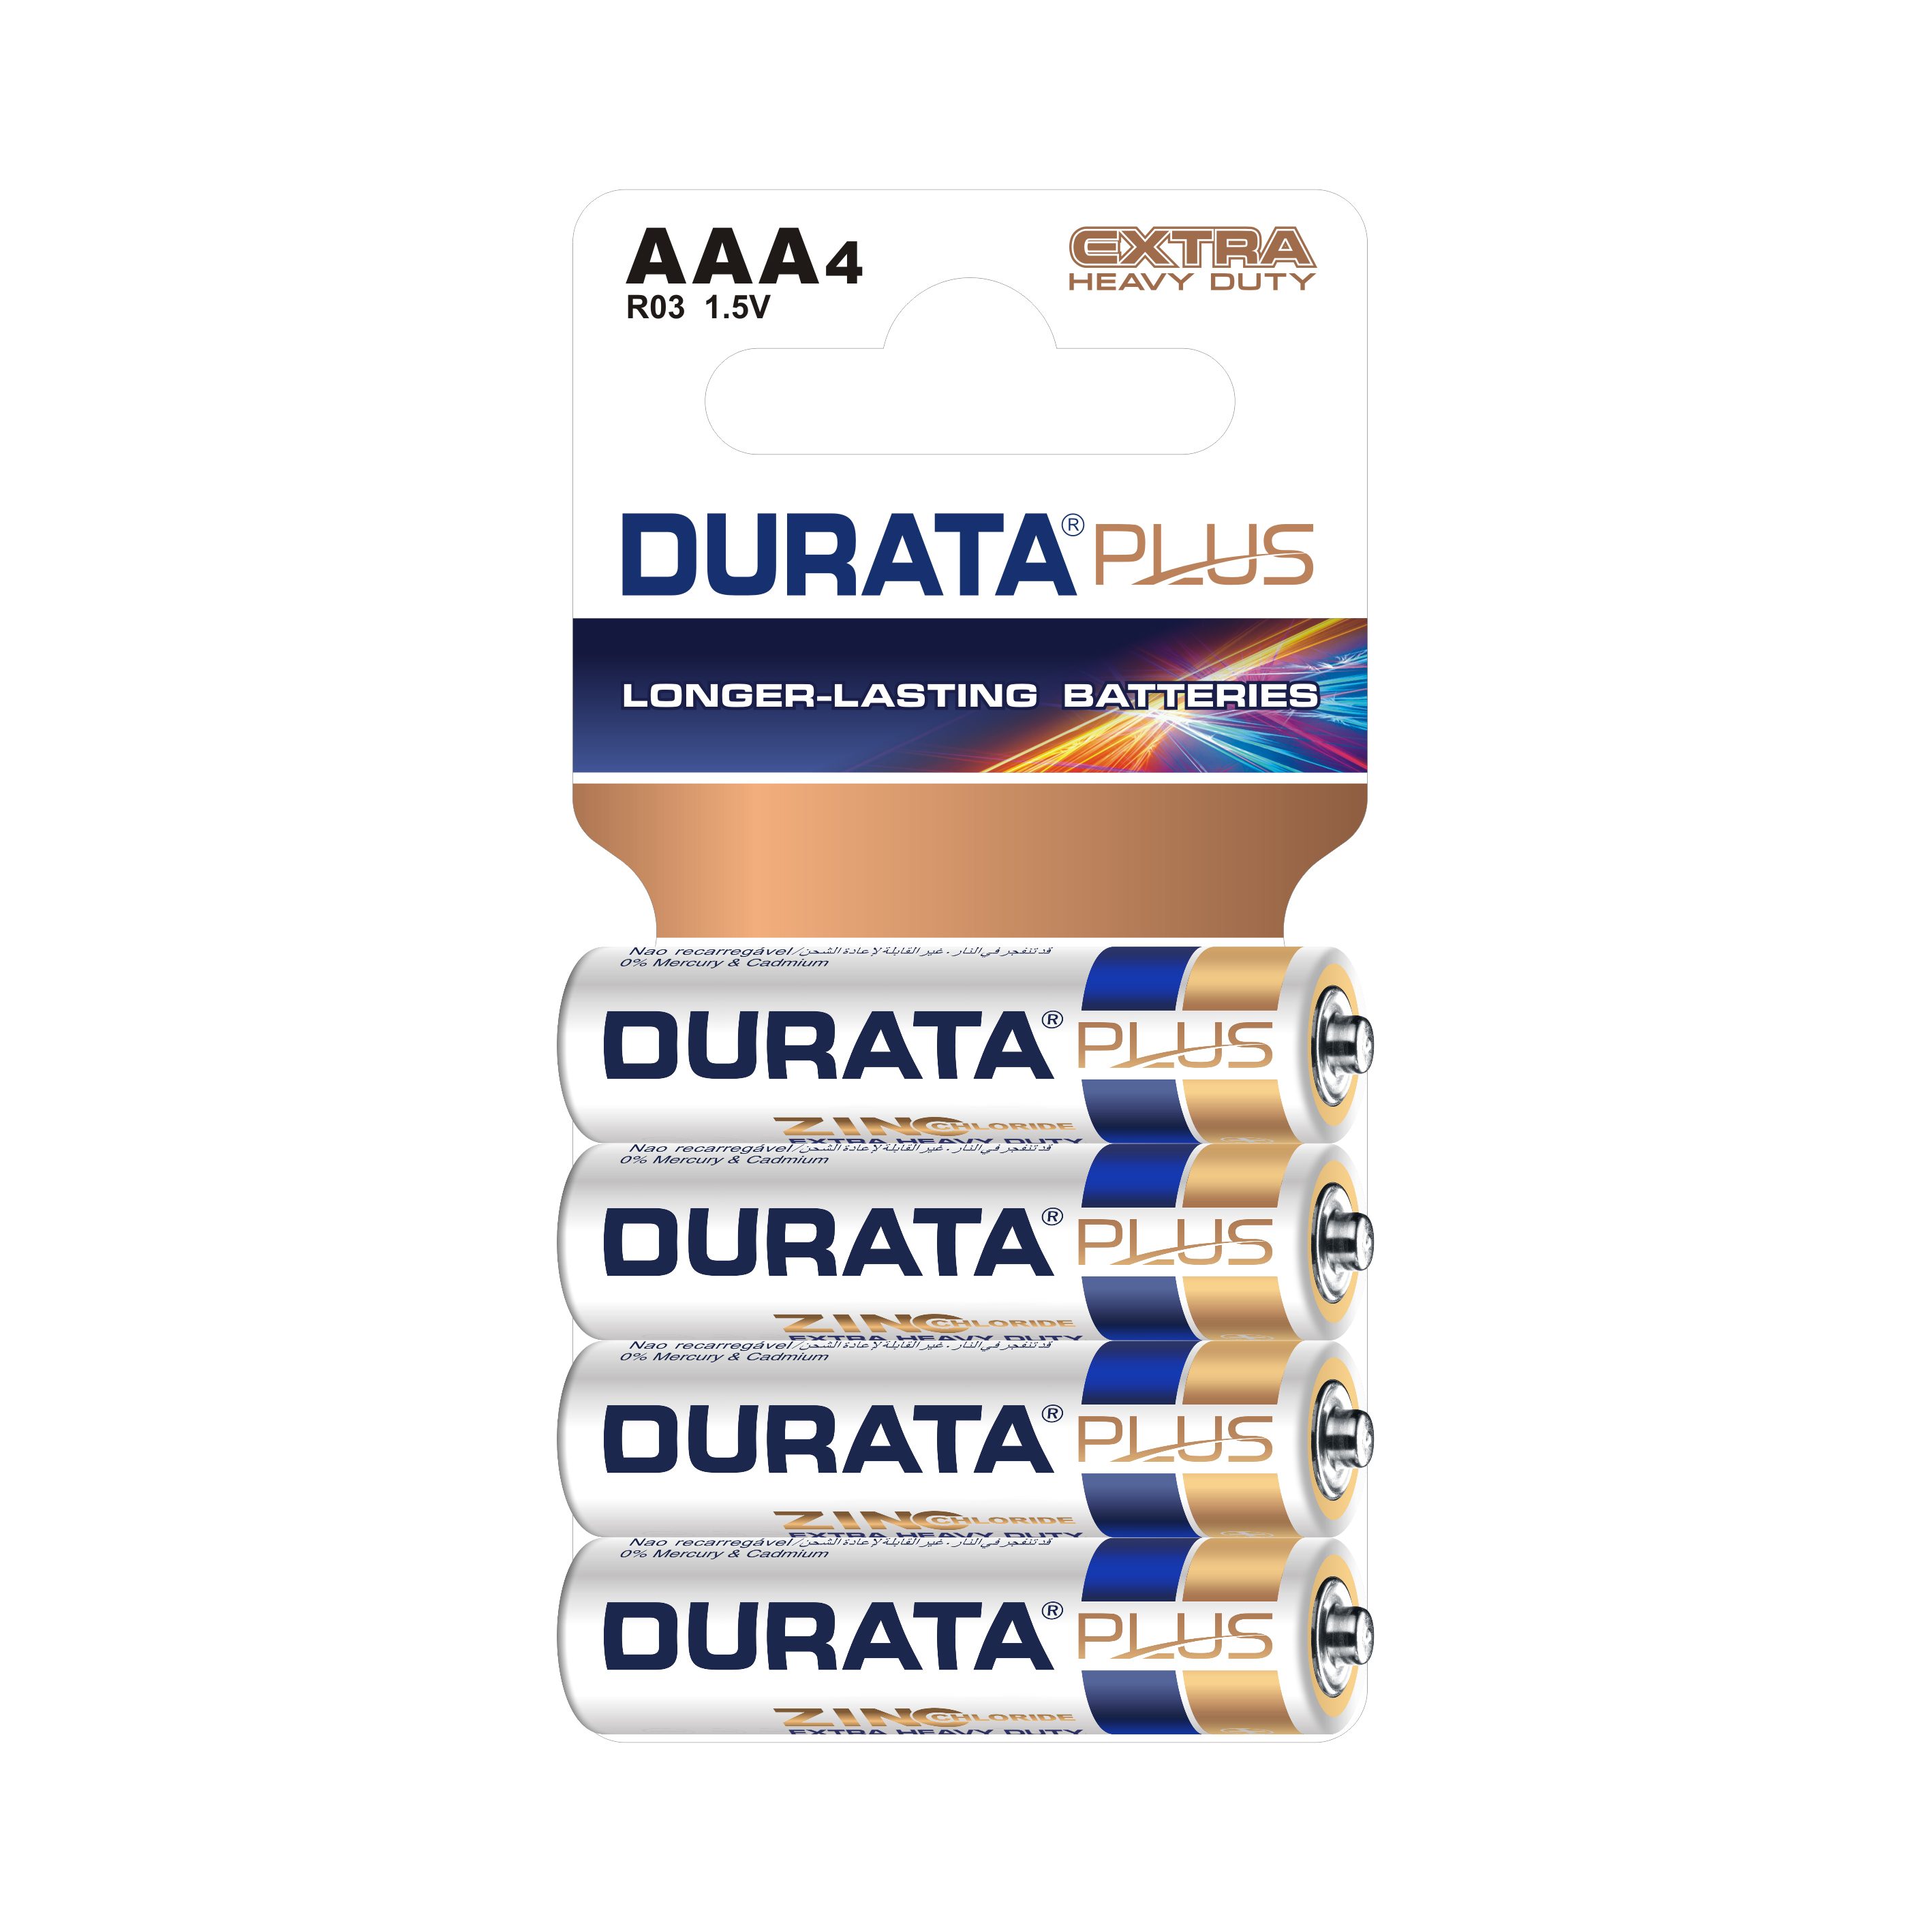 DURATA PLUS Size AAA - Shrink Card 4 Batteries